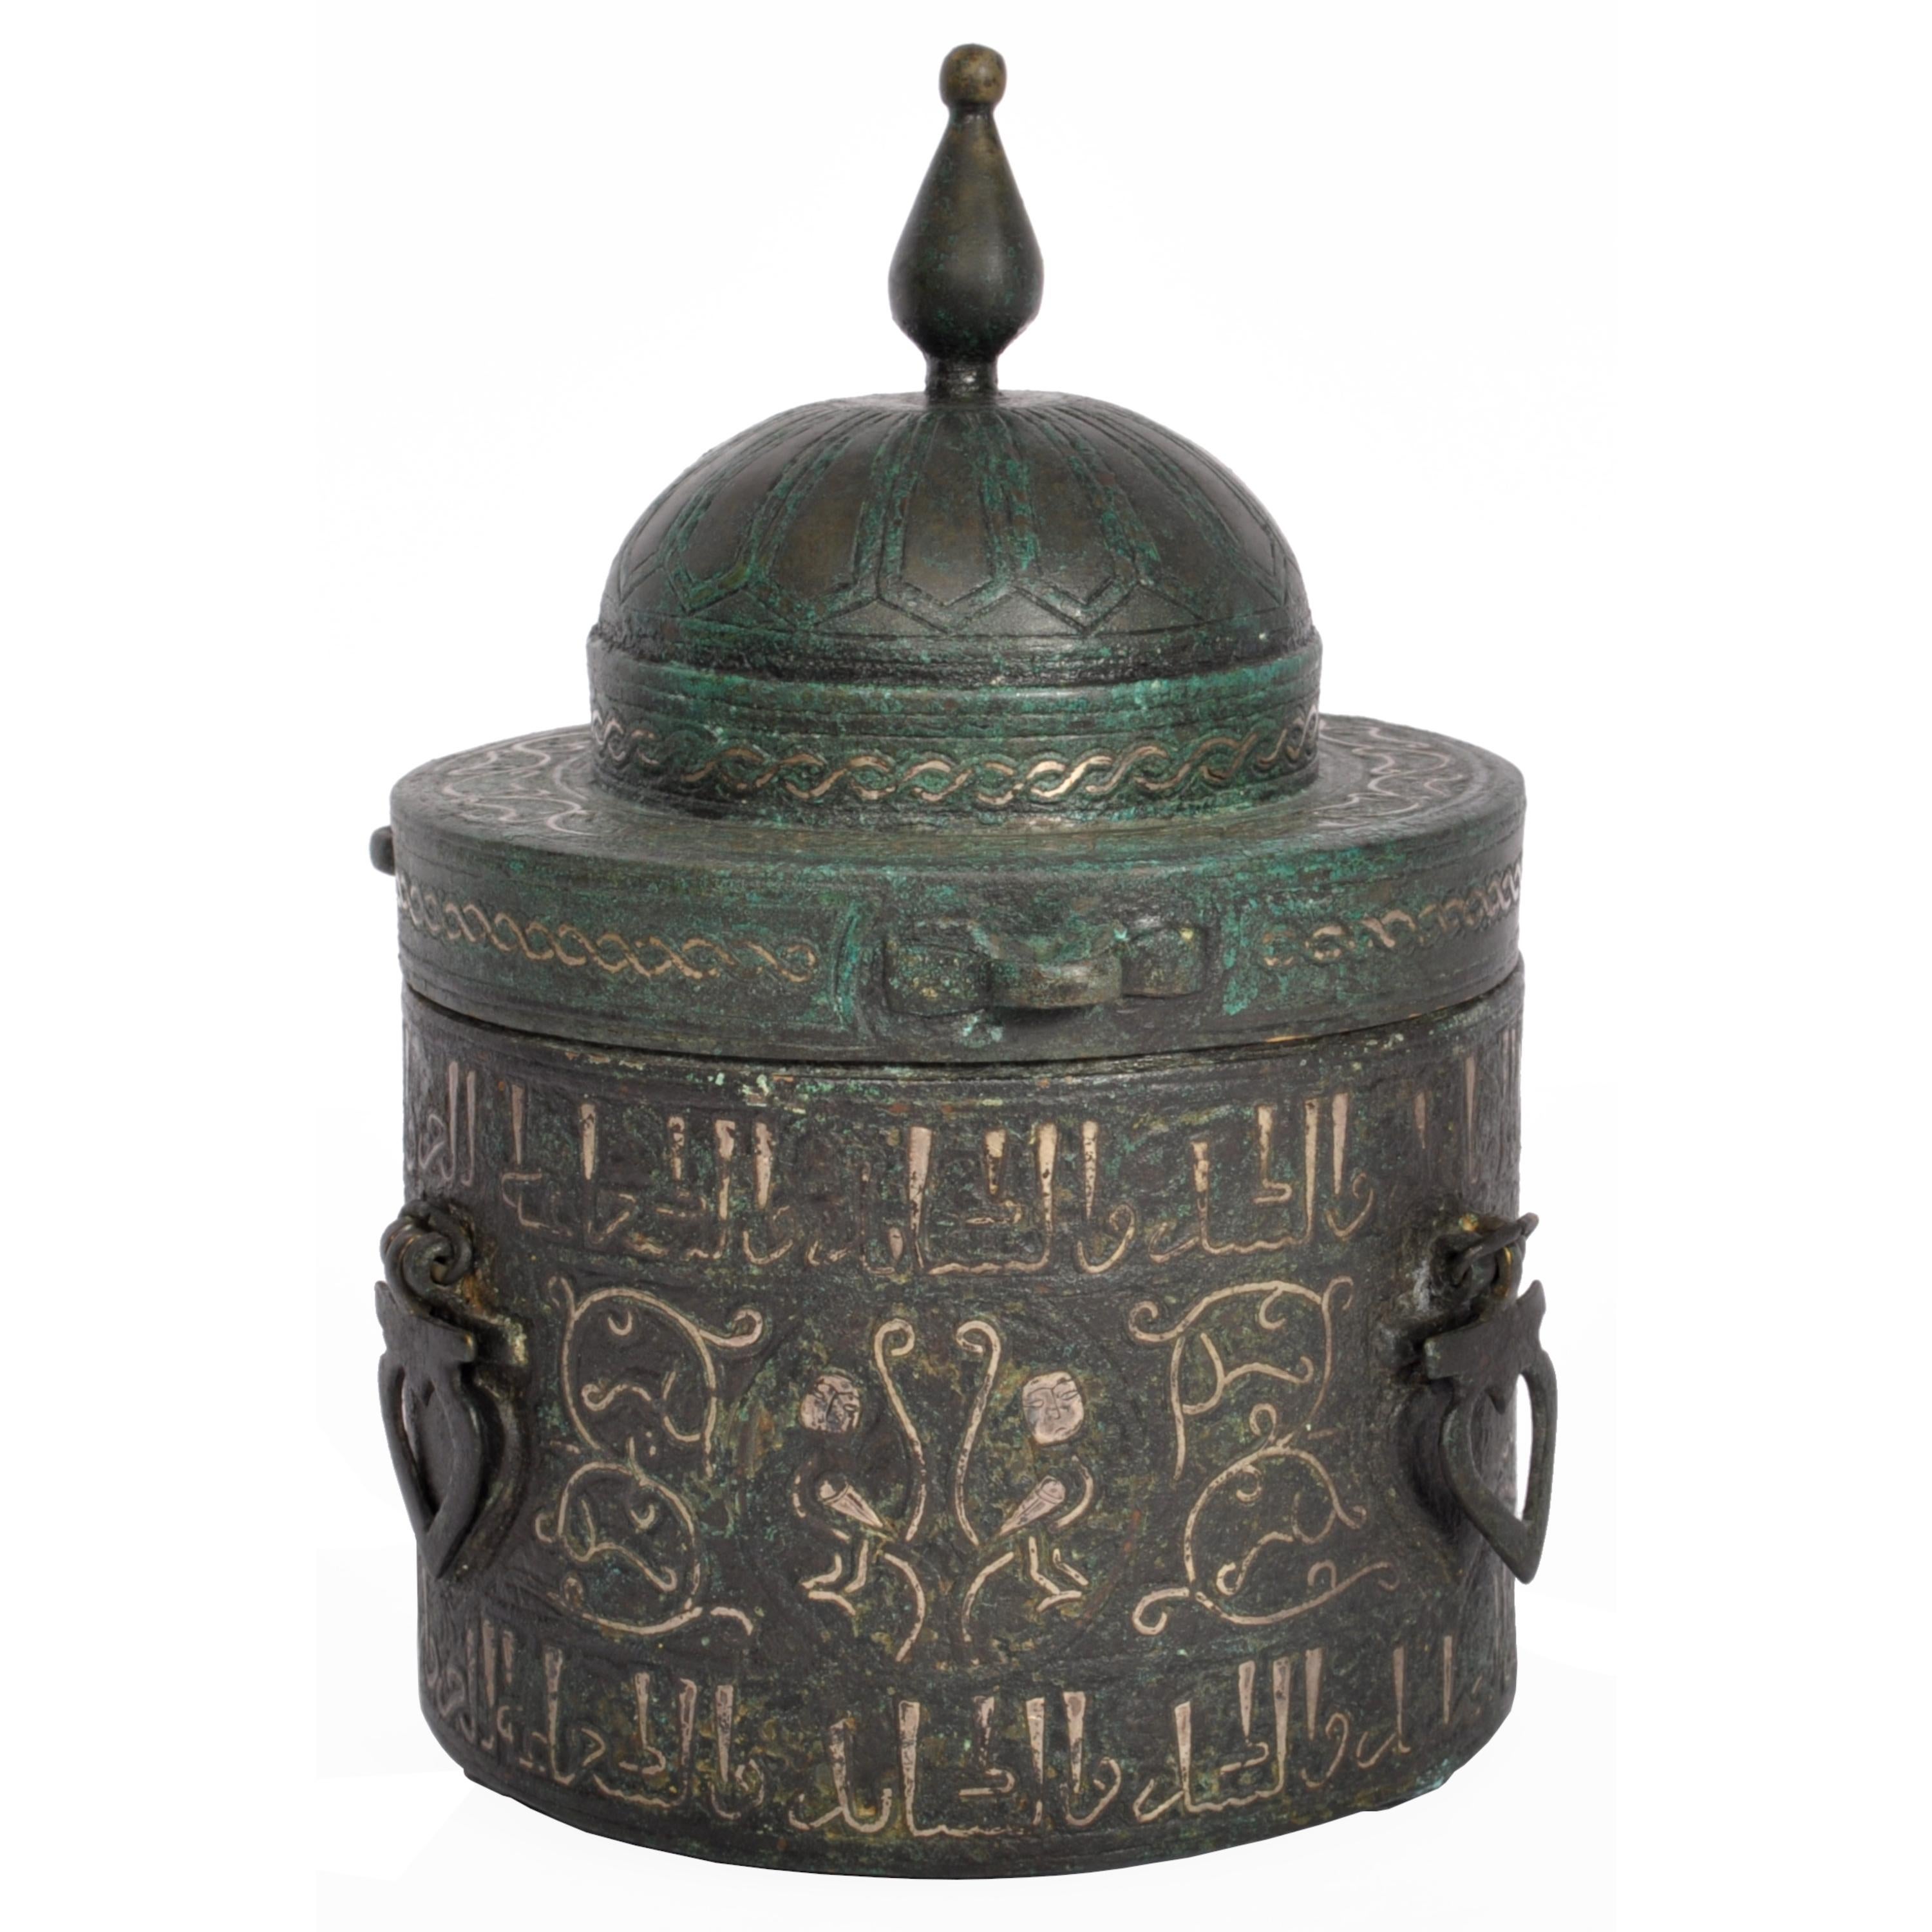 An important Islamic Khurasan bronze and silver-inlaid inkwell & cover, Eastern Persia, Circa 1200.
The inkwell of cylindrical form and having a shallow dome top cover with a tall knopped finial and inlaid with a twin band of scrolled silver. The